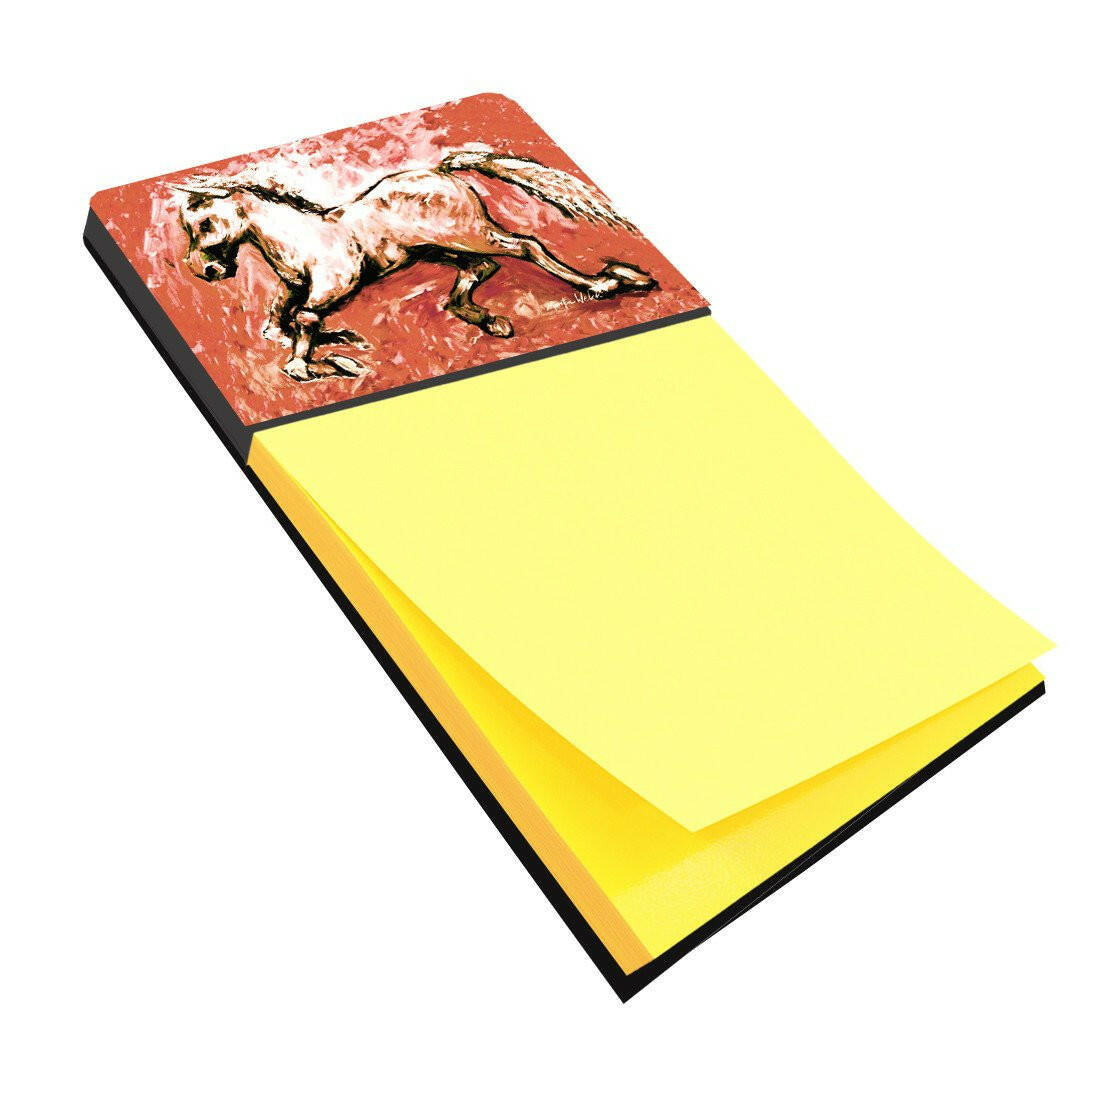 Shadow the Horse in Red Refiillable Sticky Note Holder or Postit Note Dispenser MW1170SN by Caroline's Treasures